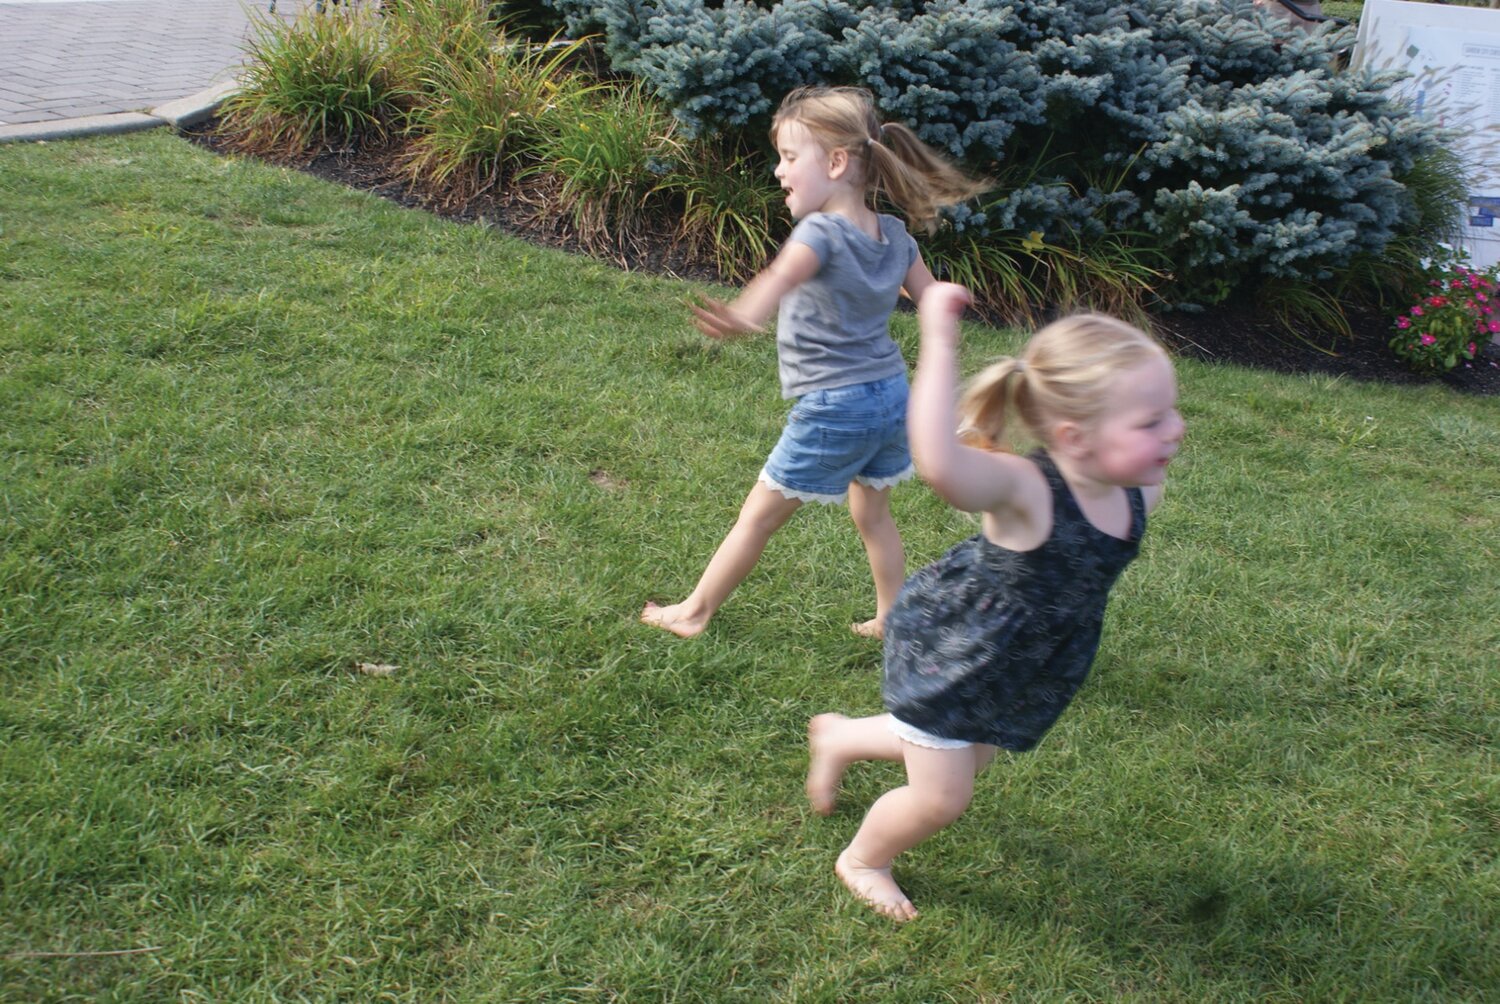 Dancing TO THE MUSIC: Harleigh Wyma, three years old (left), and friend Greta Kane, two years old, enjoy themselves and dance to the music on the grass by the gazebo.